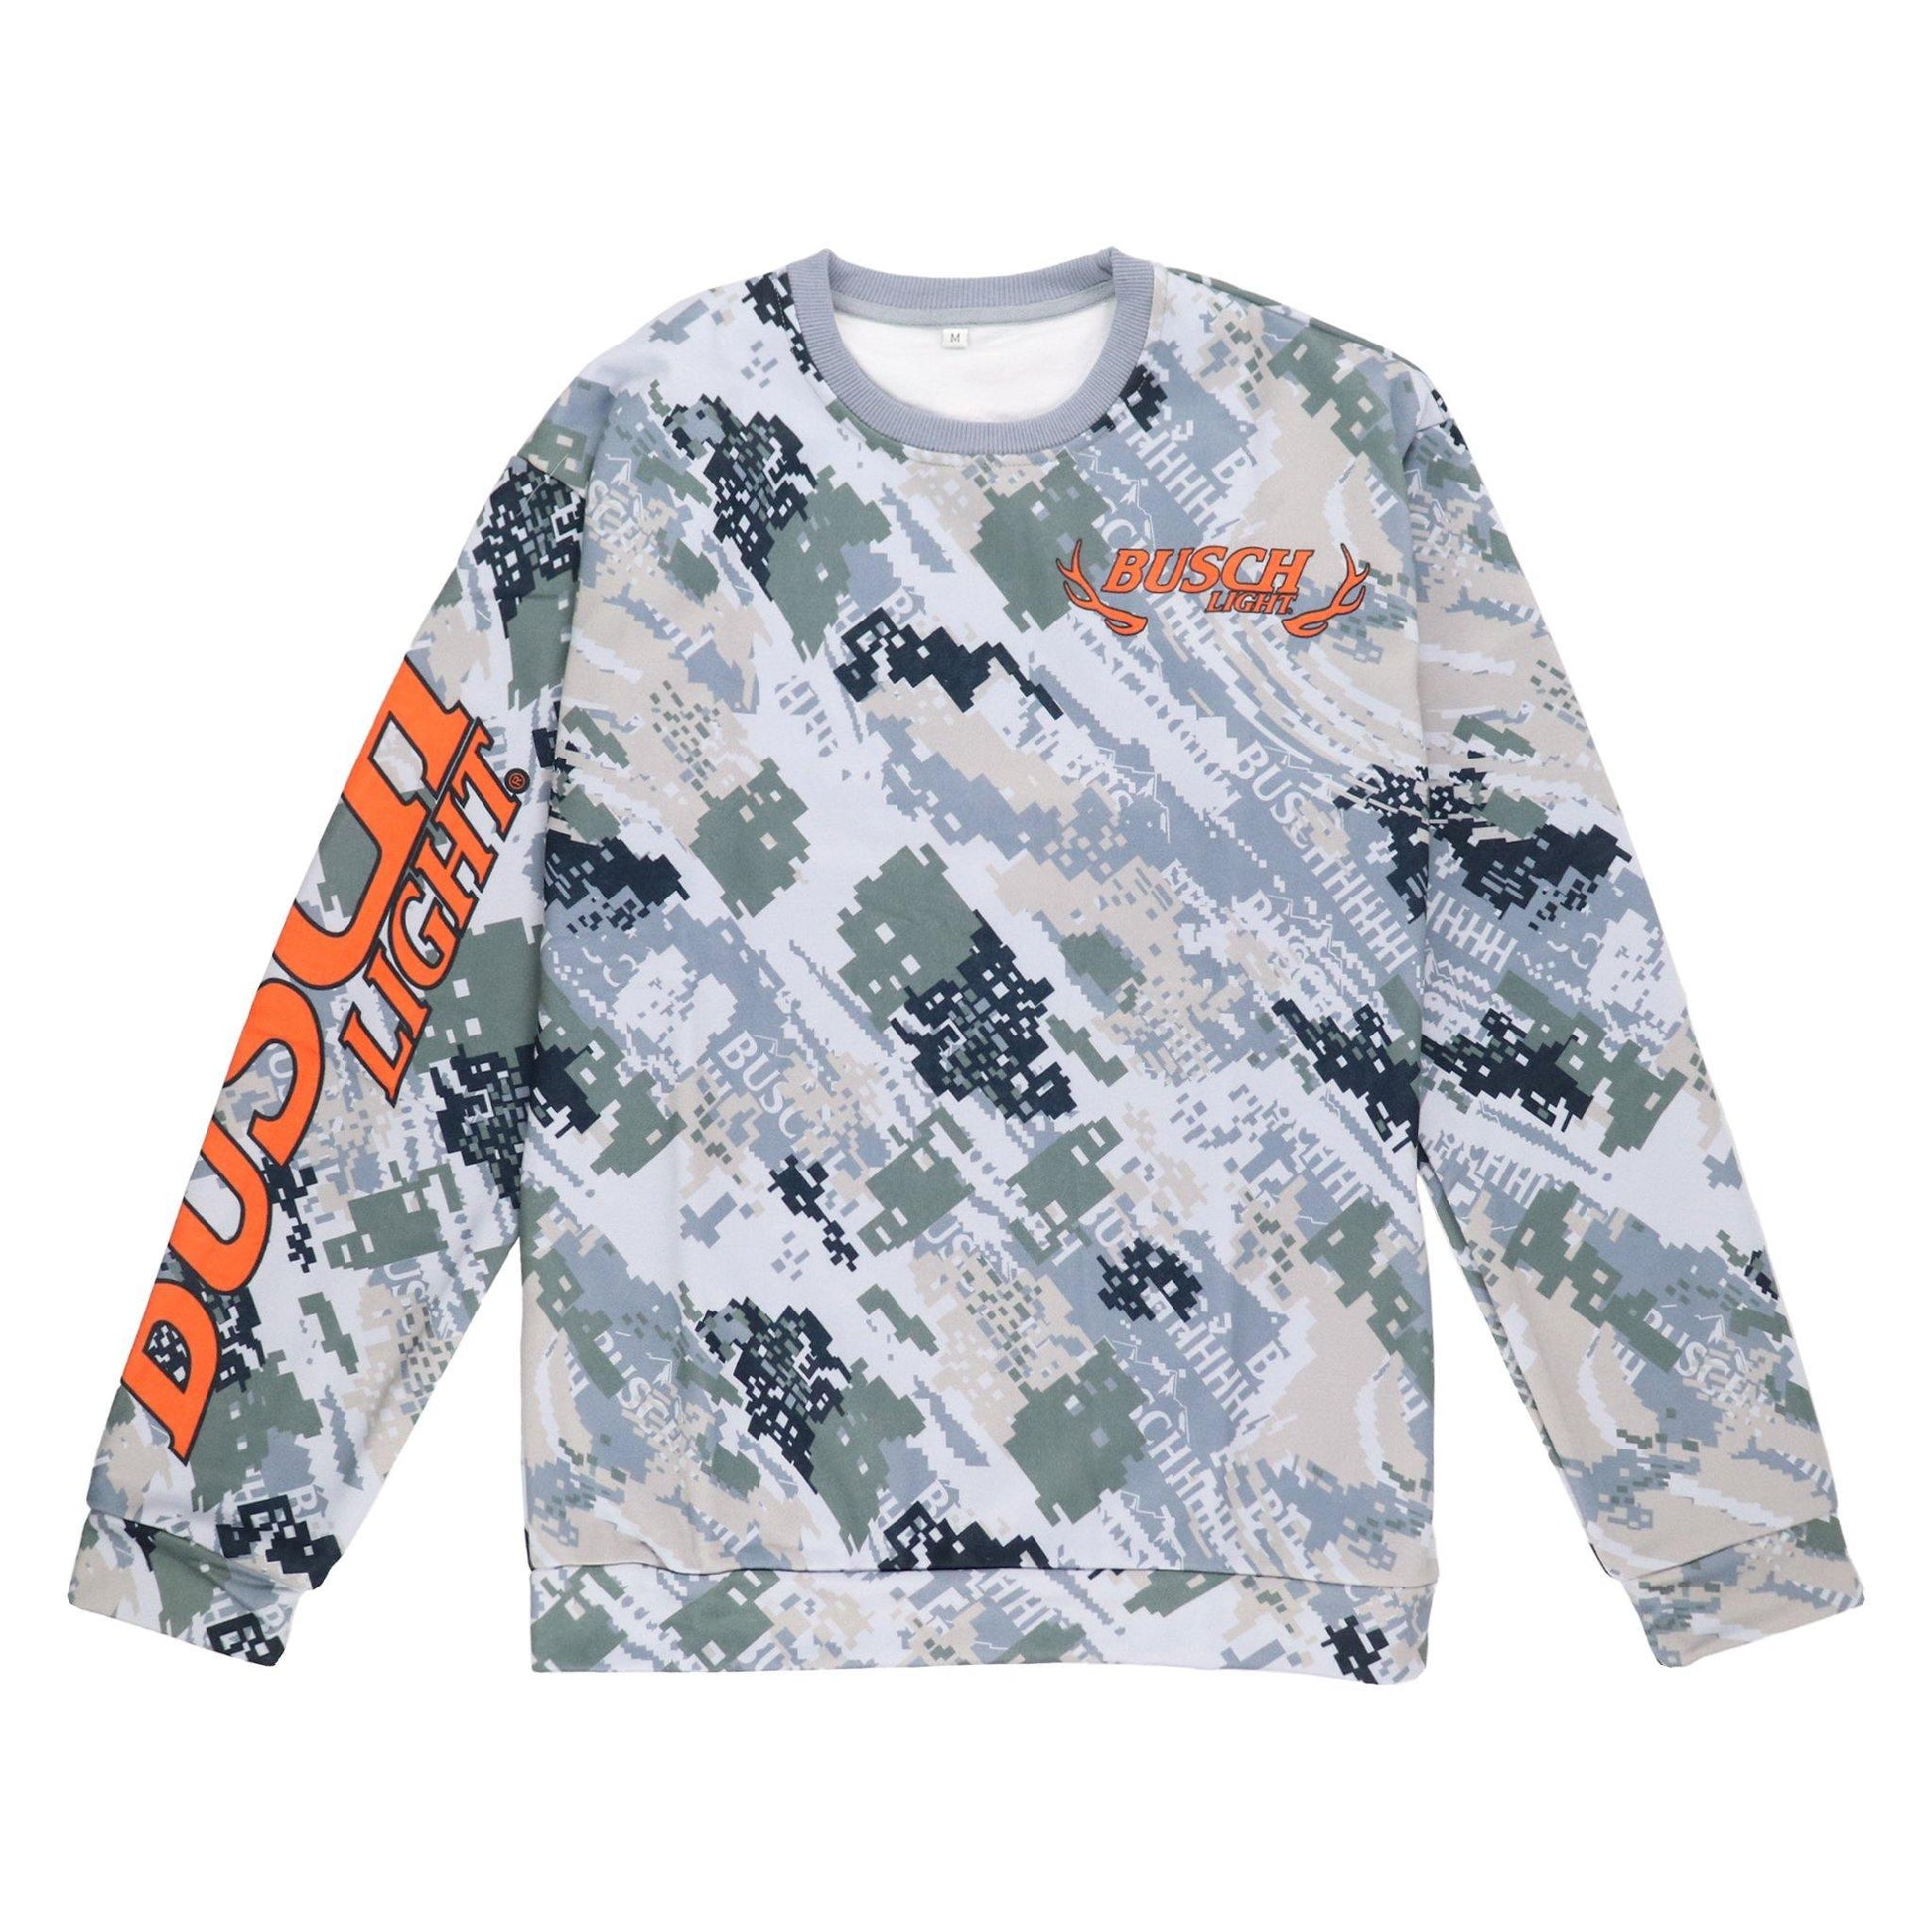 grey busch light camo sweatshirt with "busch light" in orange on right sleeve and upper left chest area